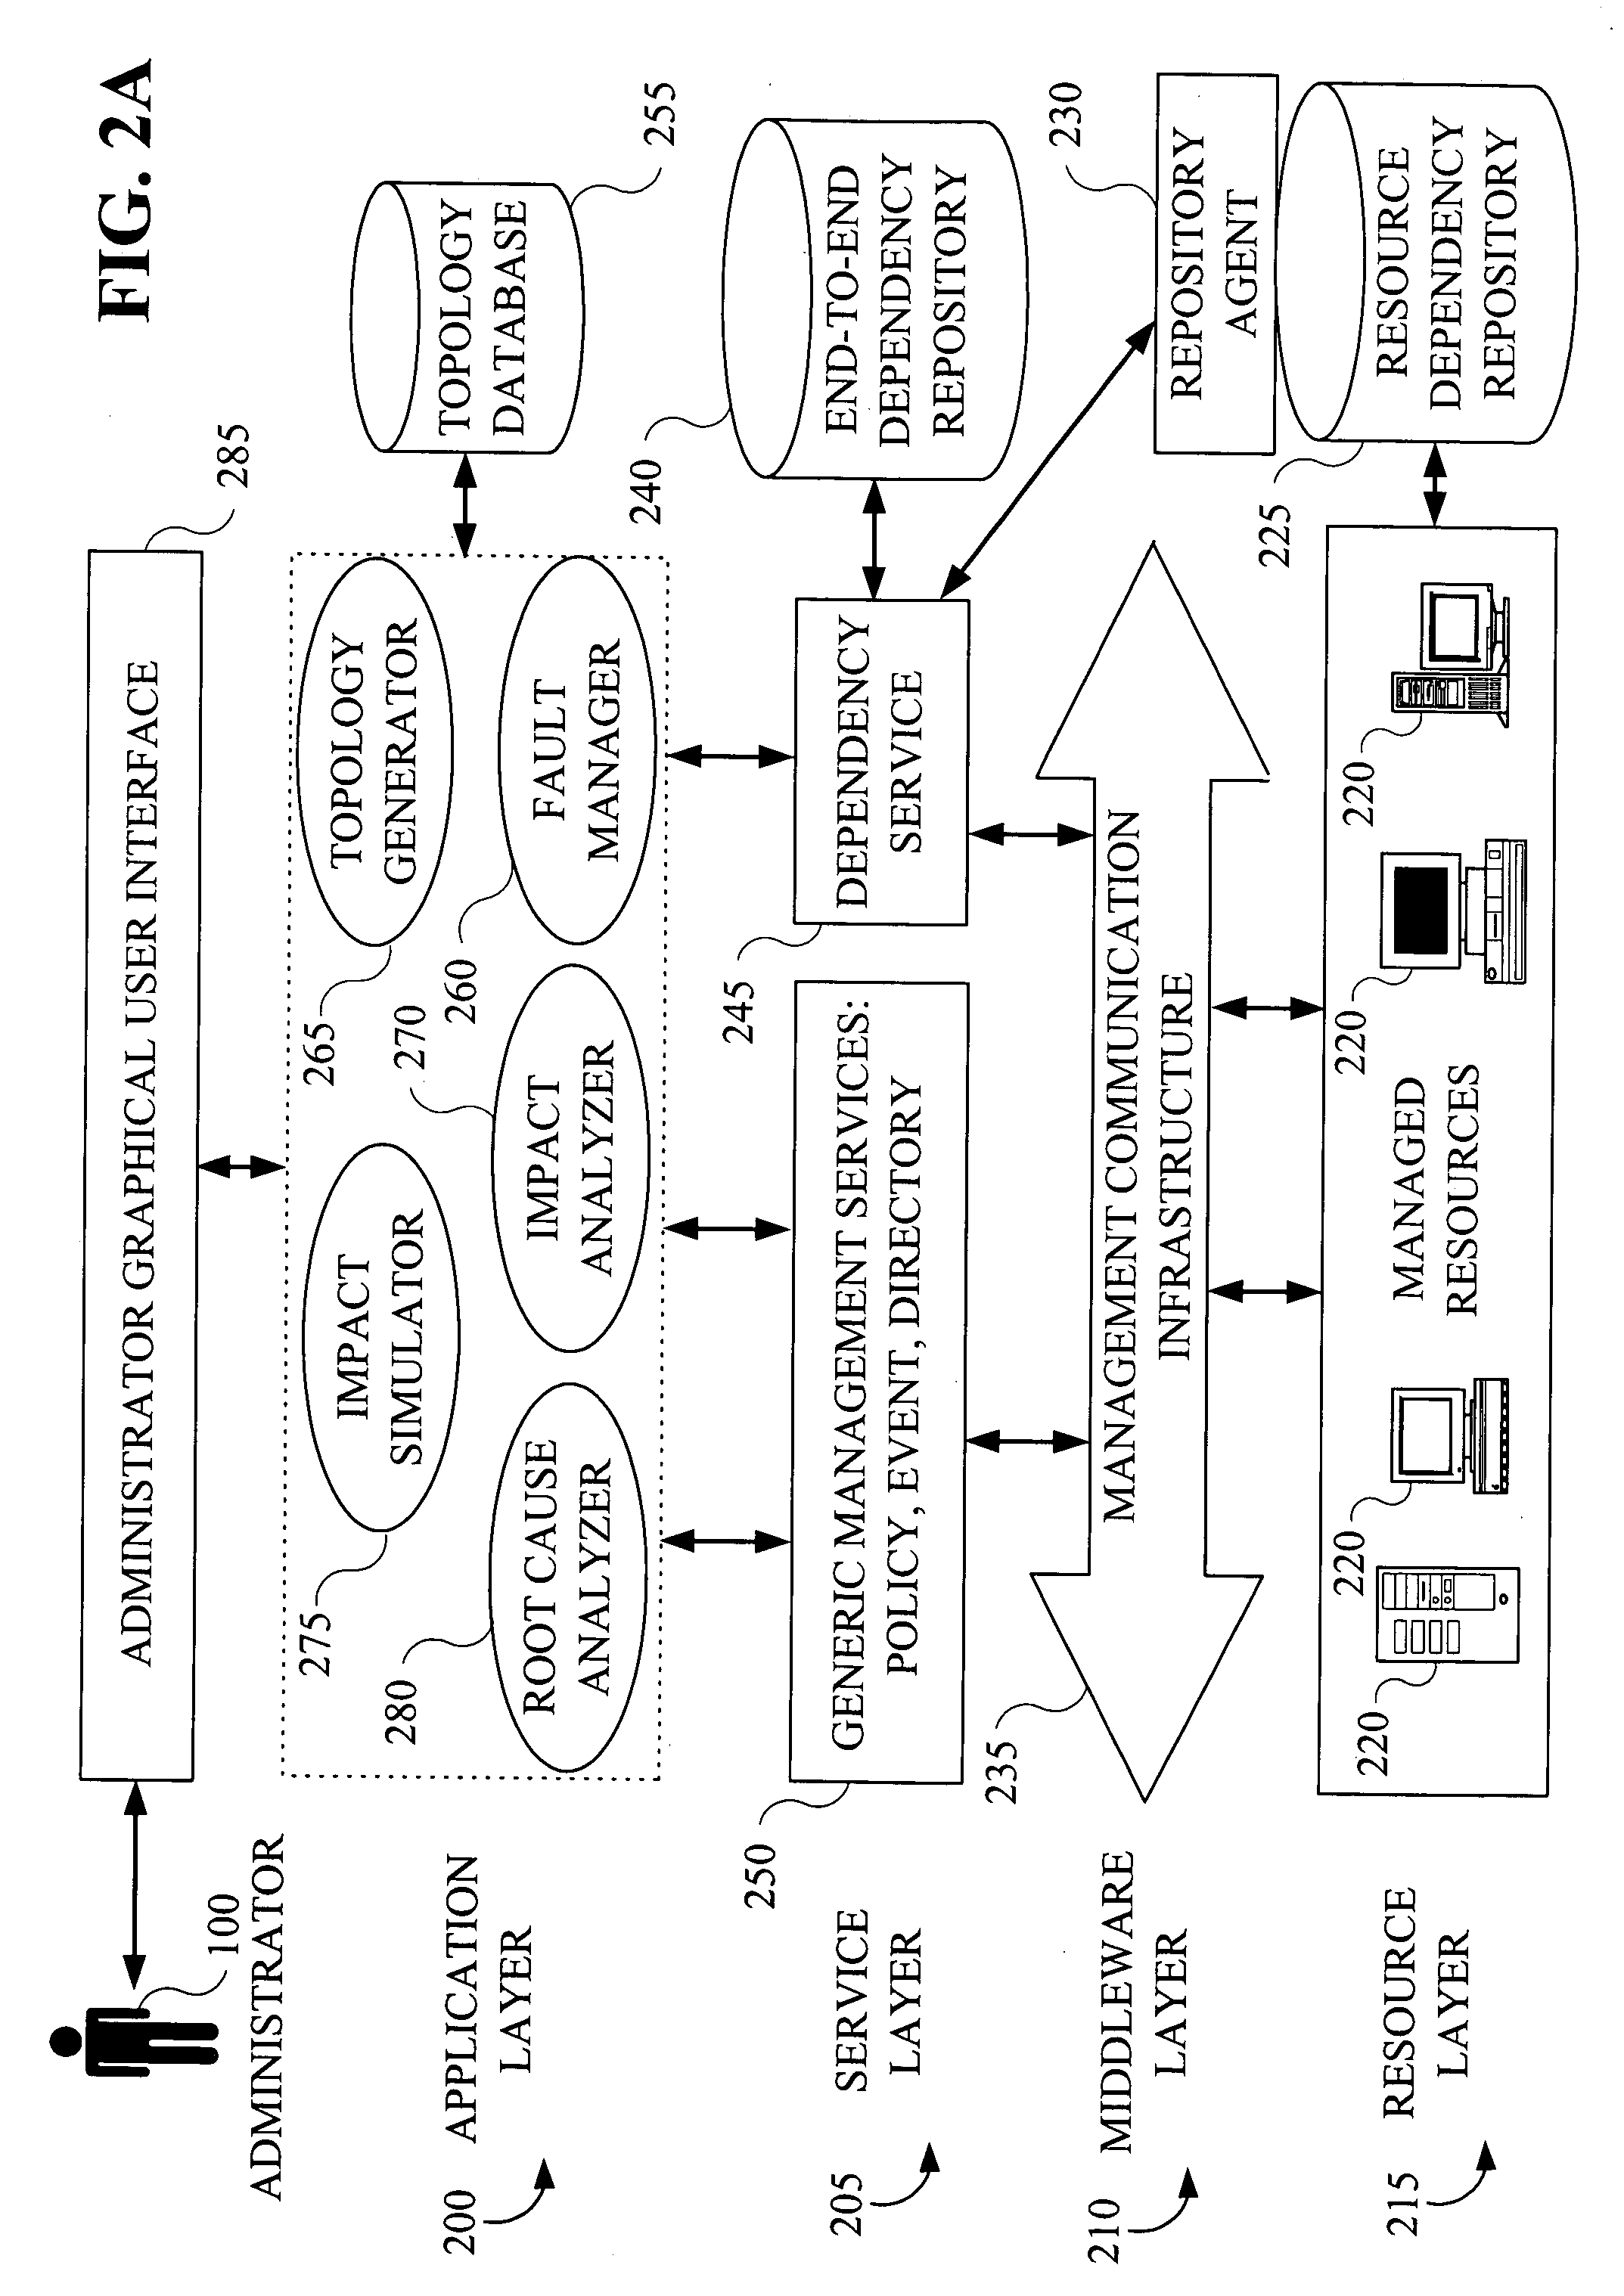 Methods and apparatus for topology discovery and representation of distributed applications and services